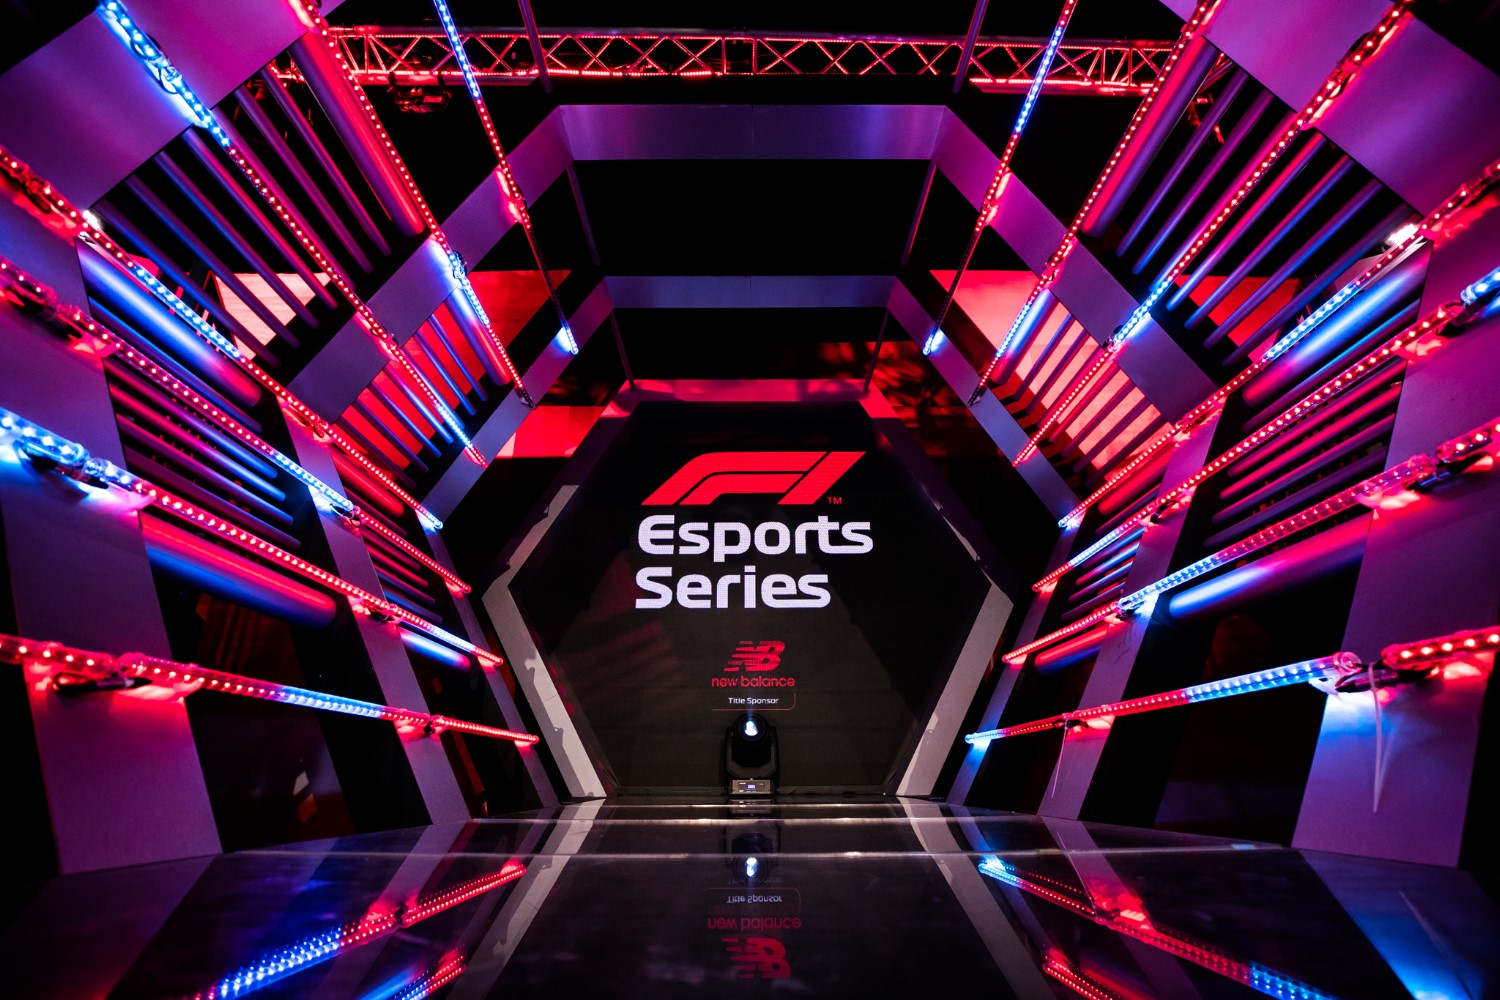 This generation should be called the eSport generation